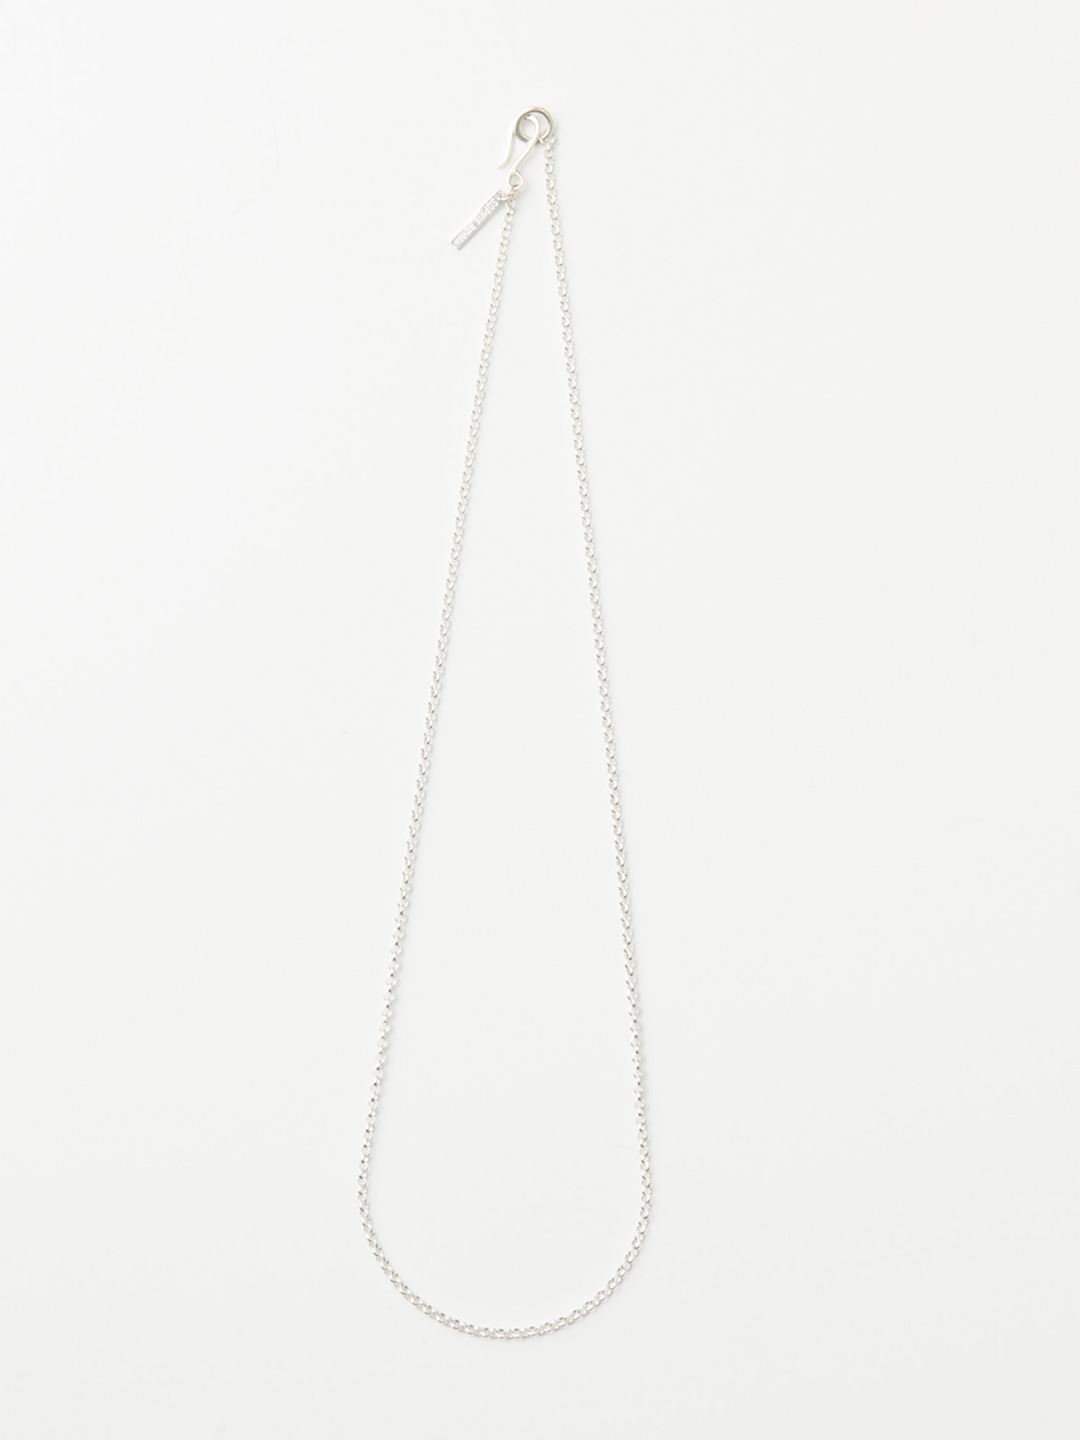 Nage Chain Necklace 50cm - Silver